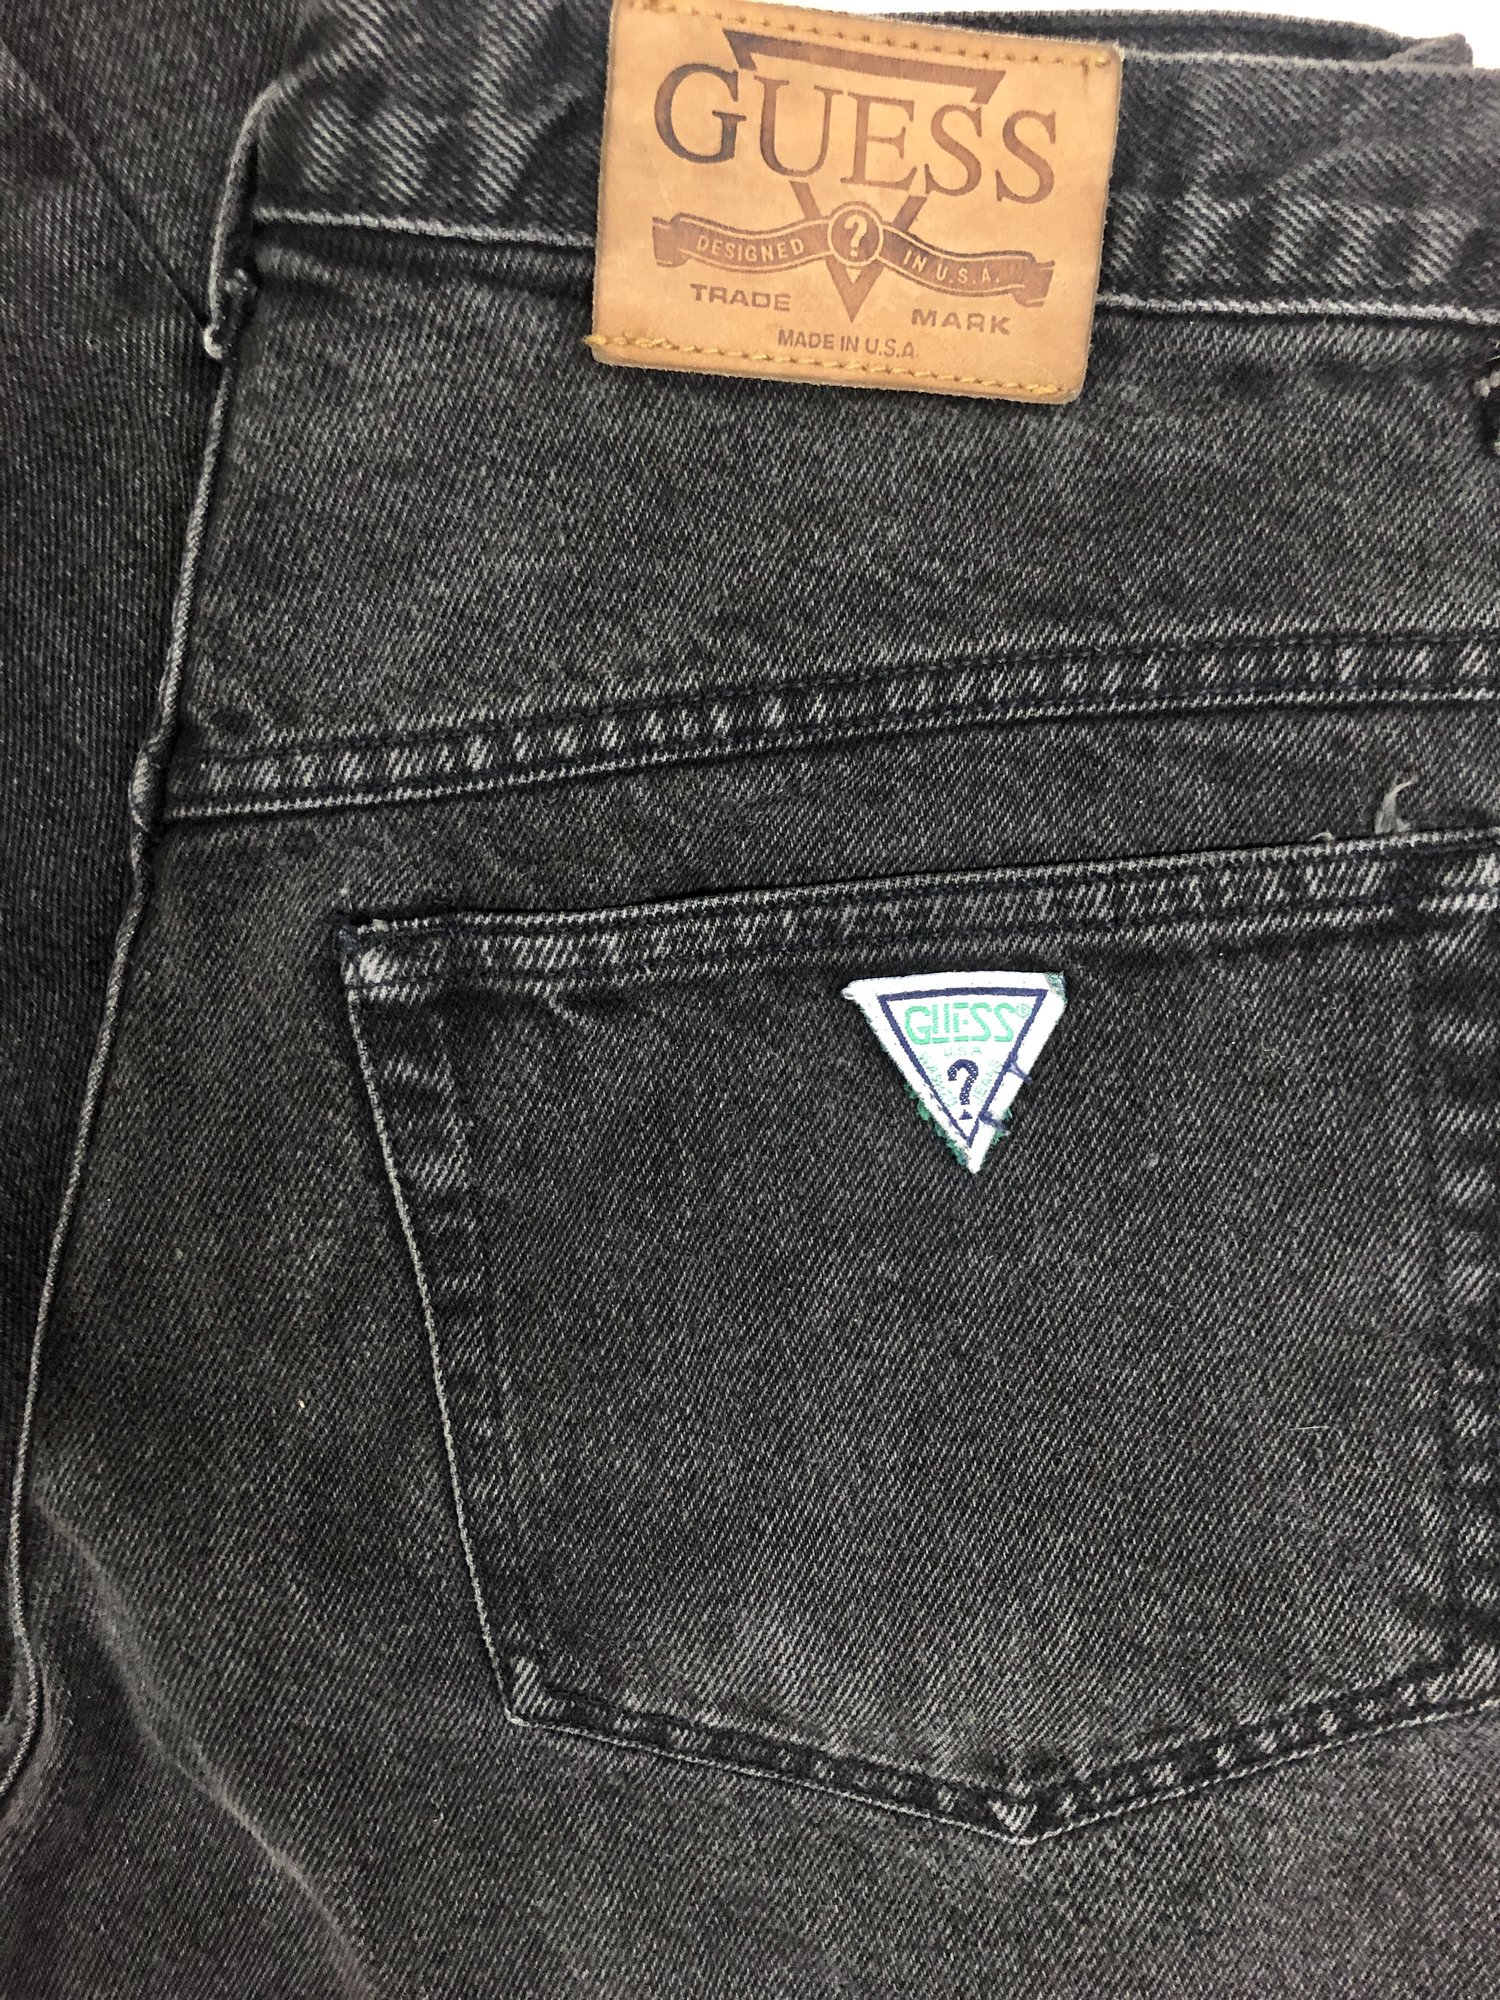 THIRD SISTER VINTAGE Men's Guess Jeans - Stitched Up